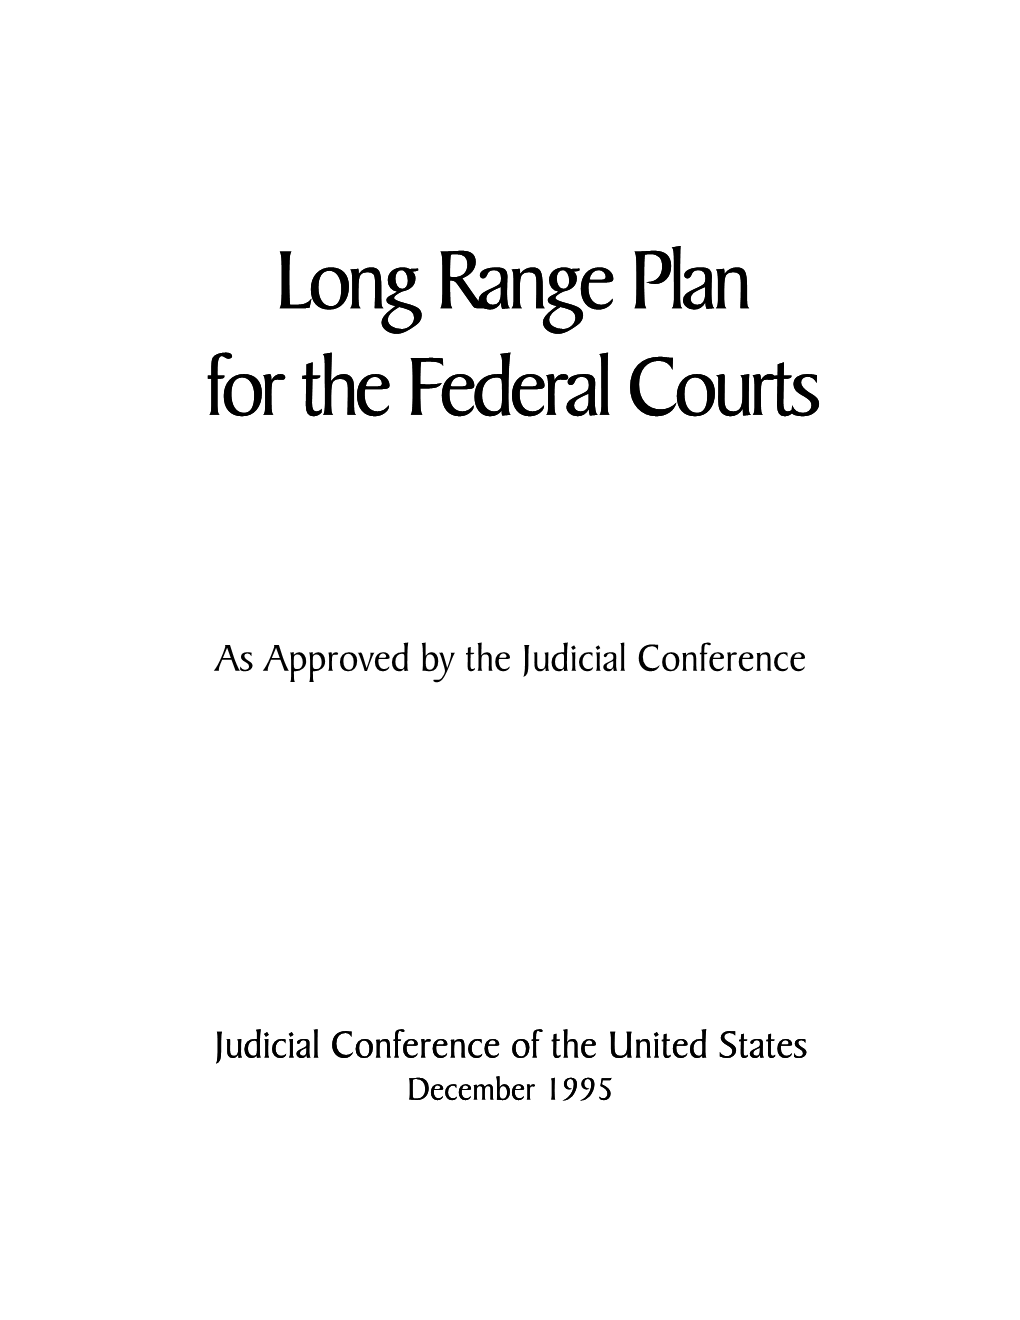 Long Range Plan for the Federal Courts